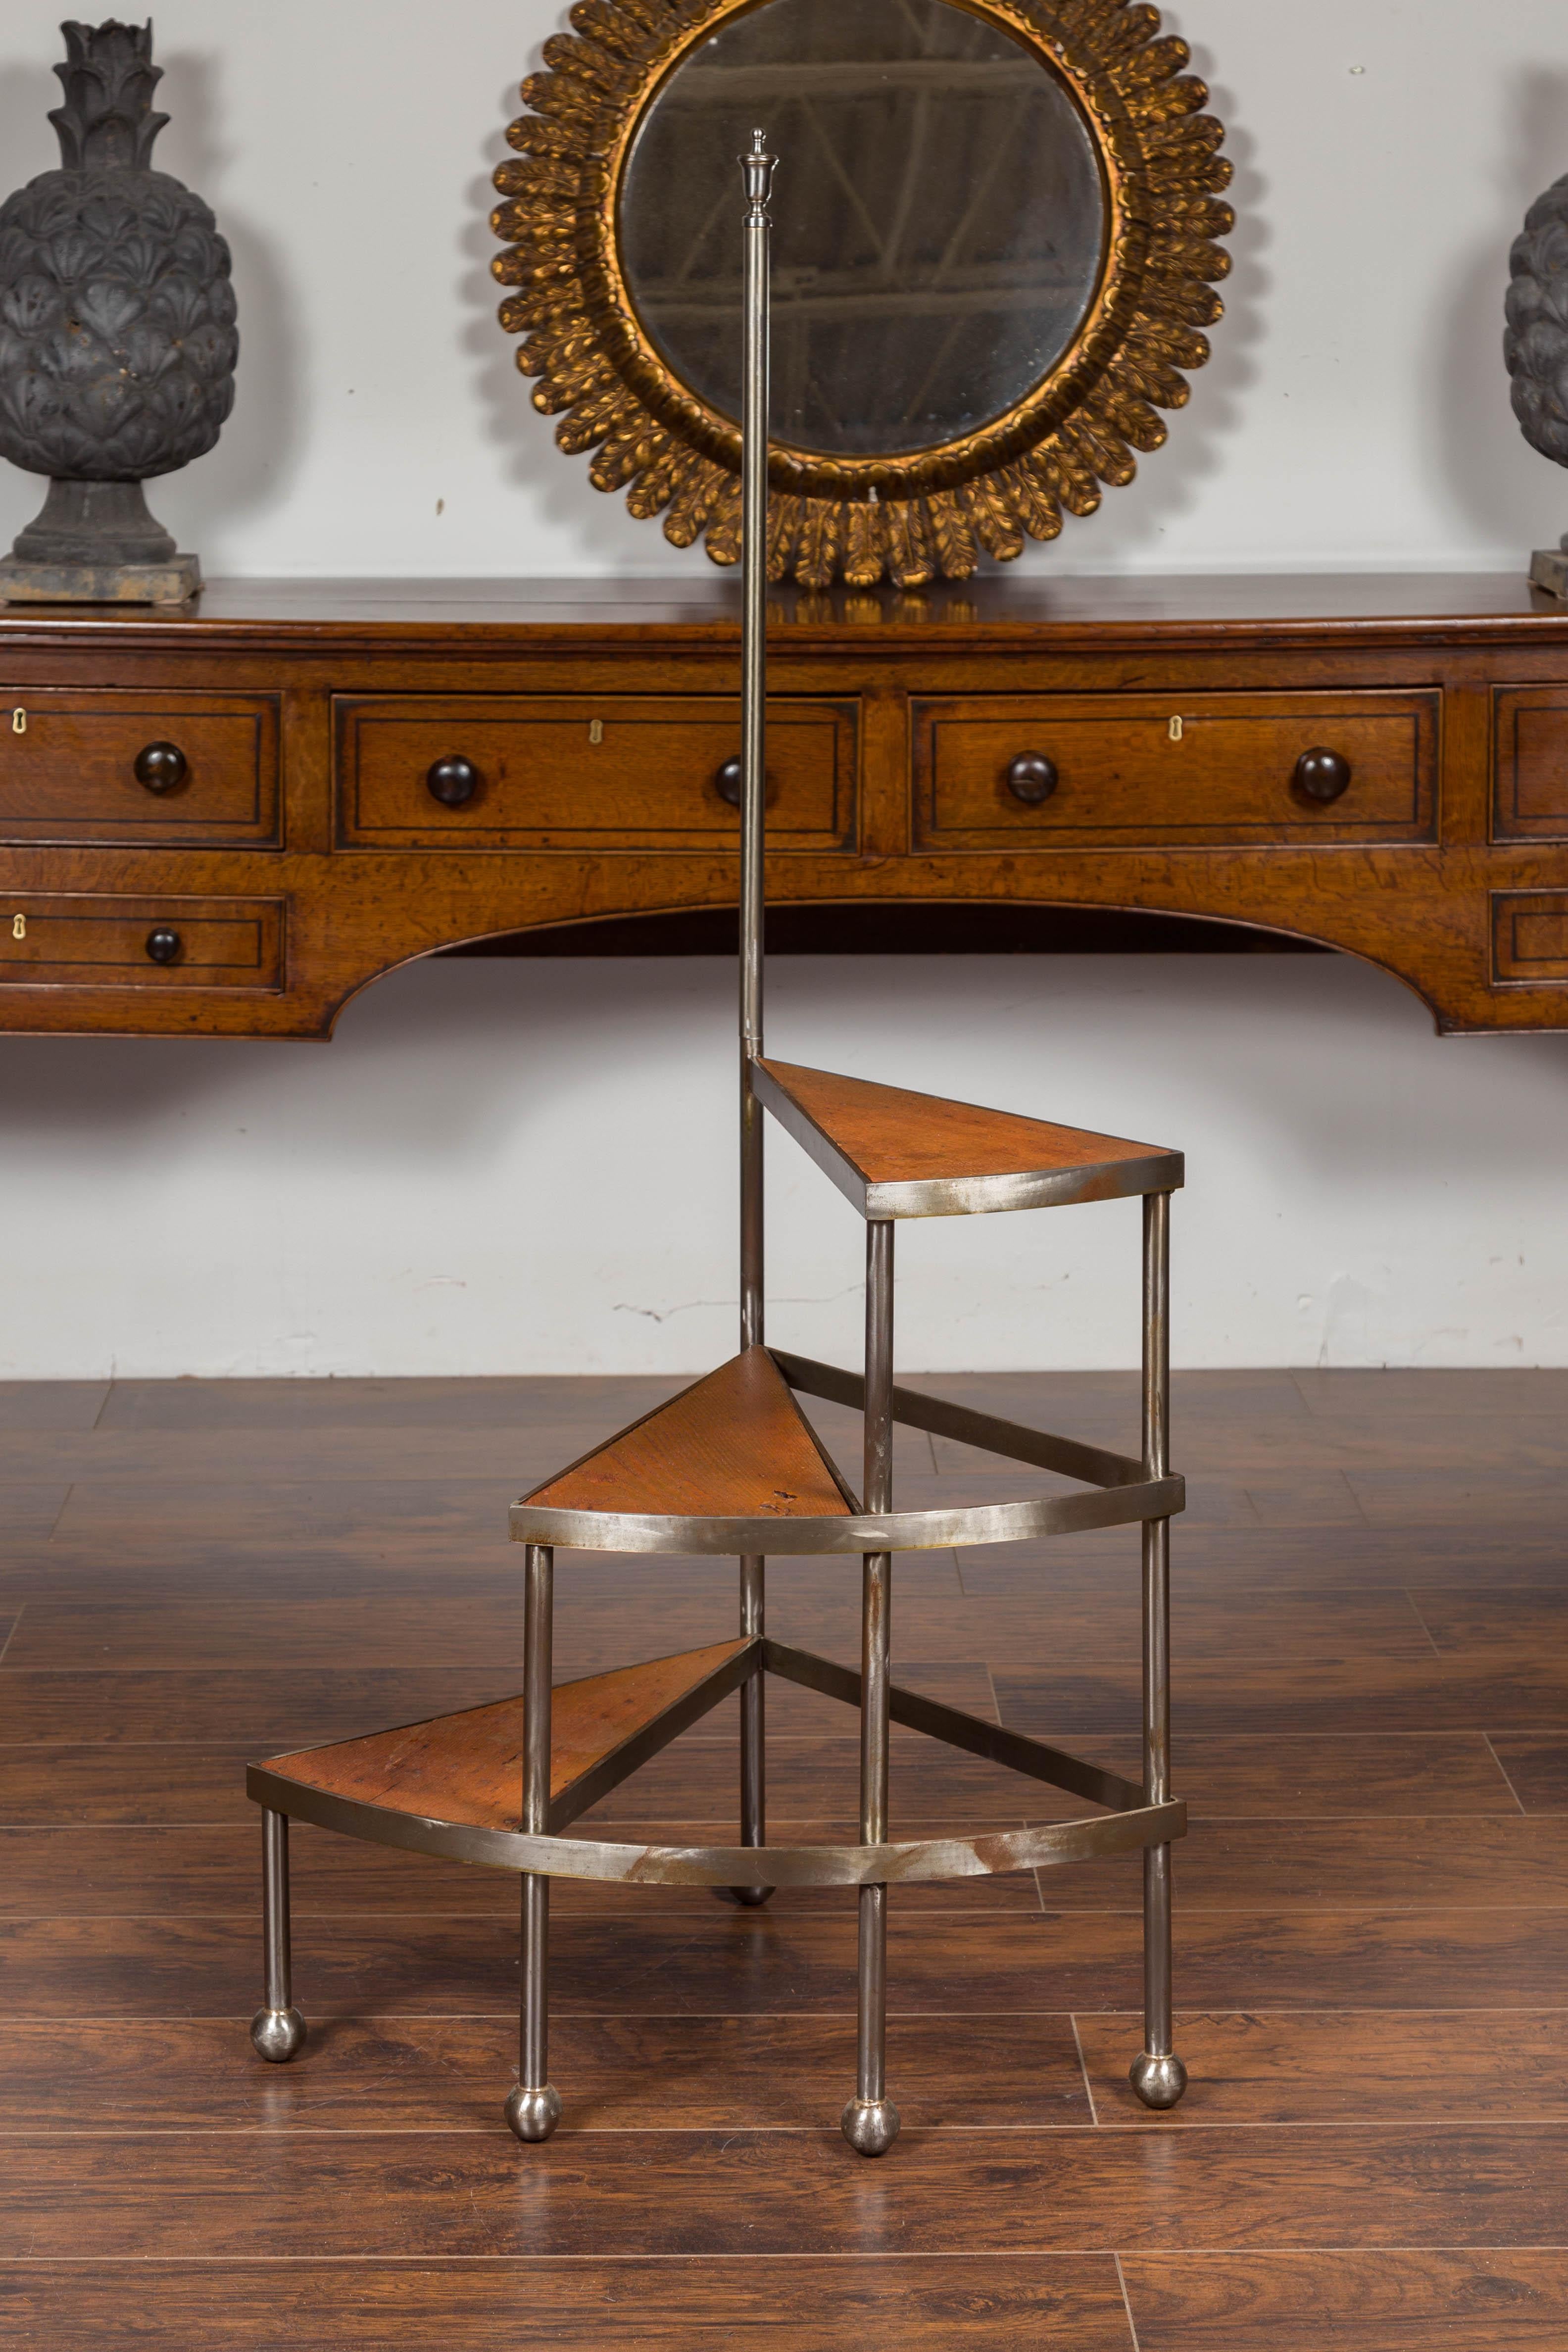 English steel and oak library steps from the mid-20th century, with spiral design and ball feet. Born in England during the midcentury period, these library steps feature a central steel pole topped with an urn-shaped finial, connected to three oak